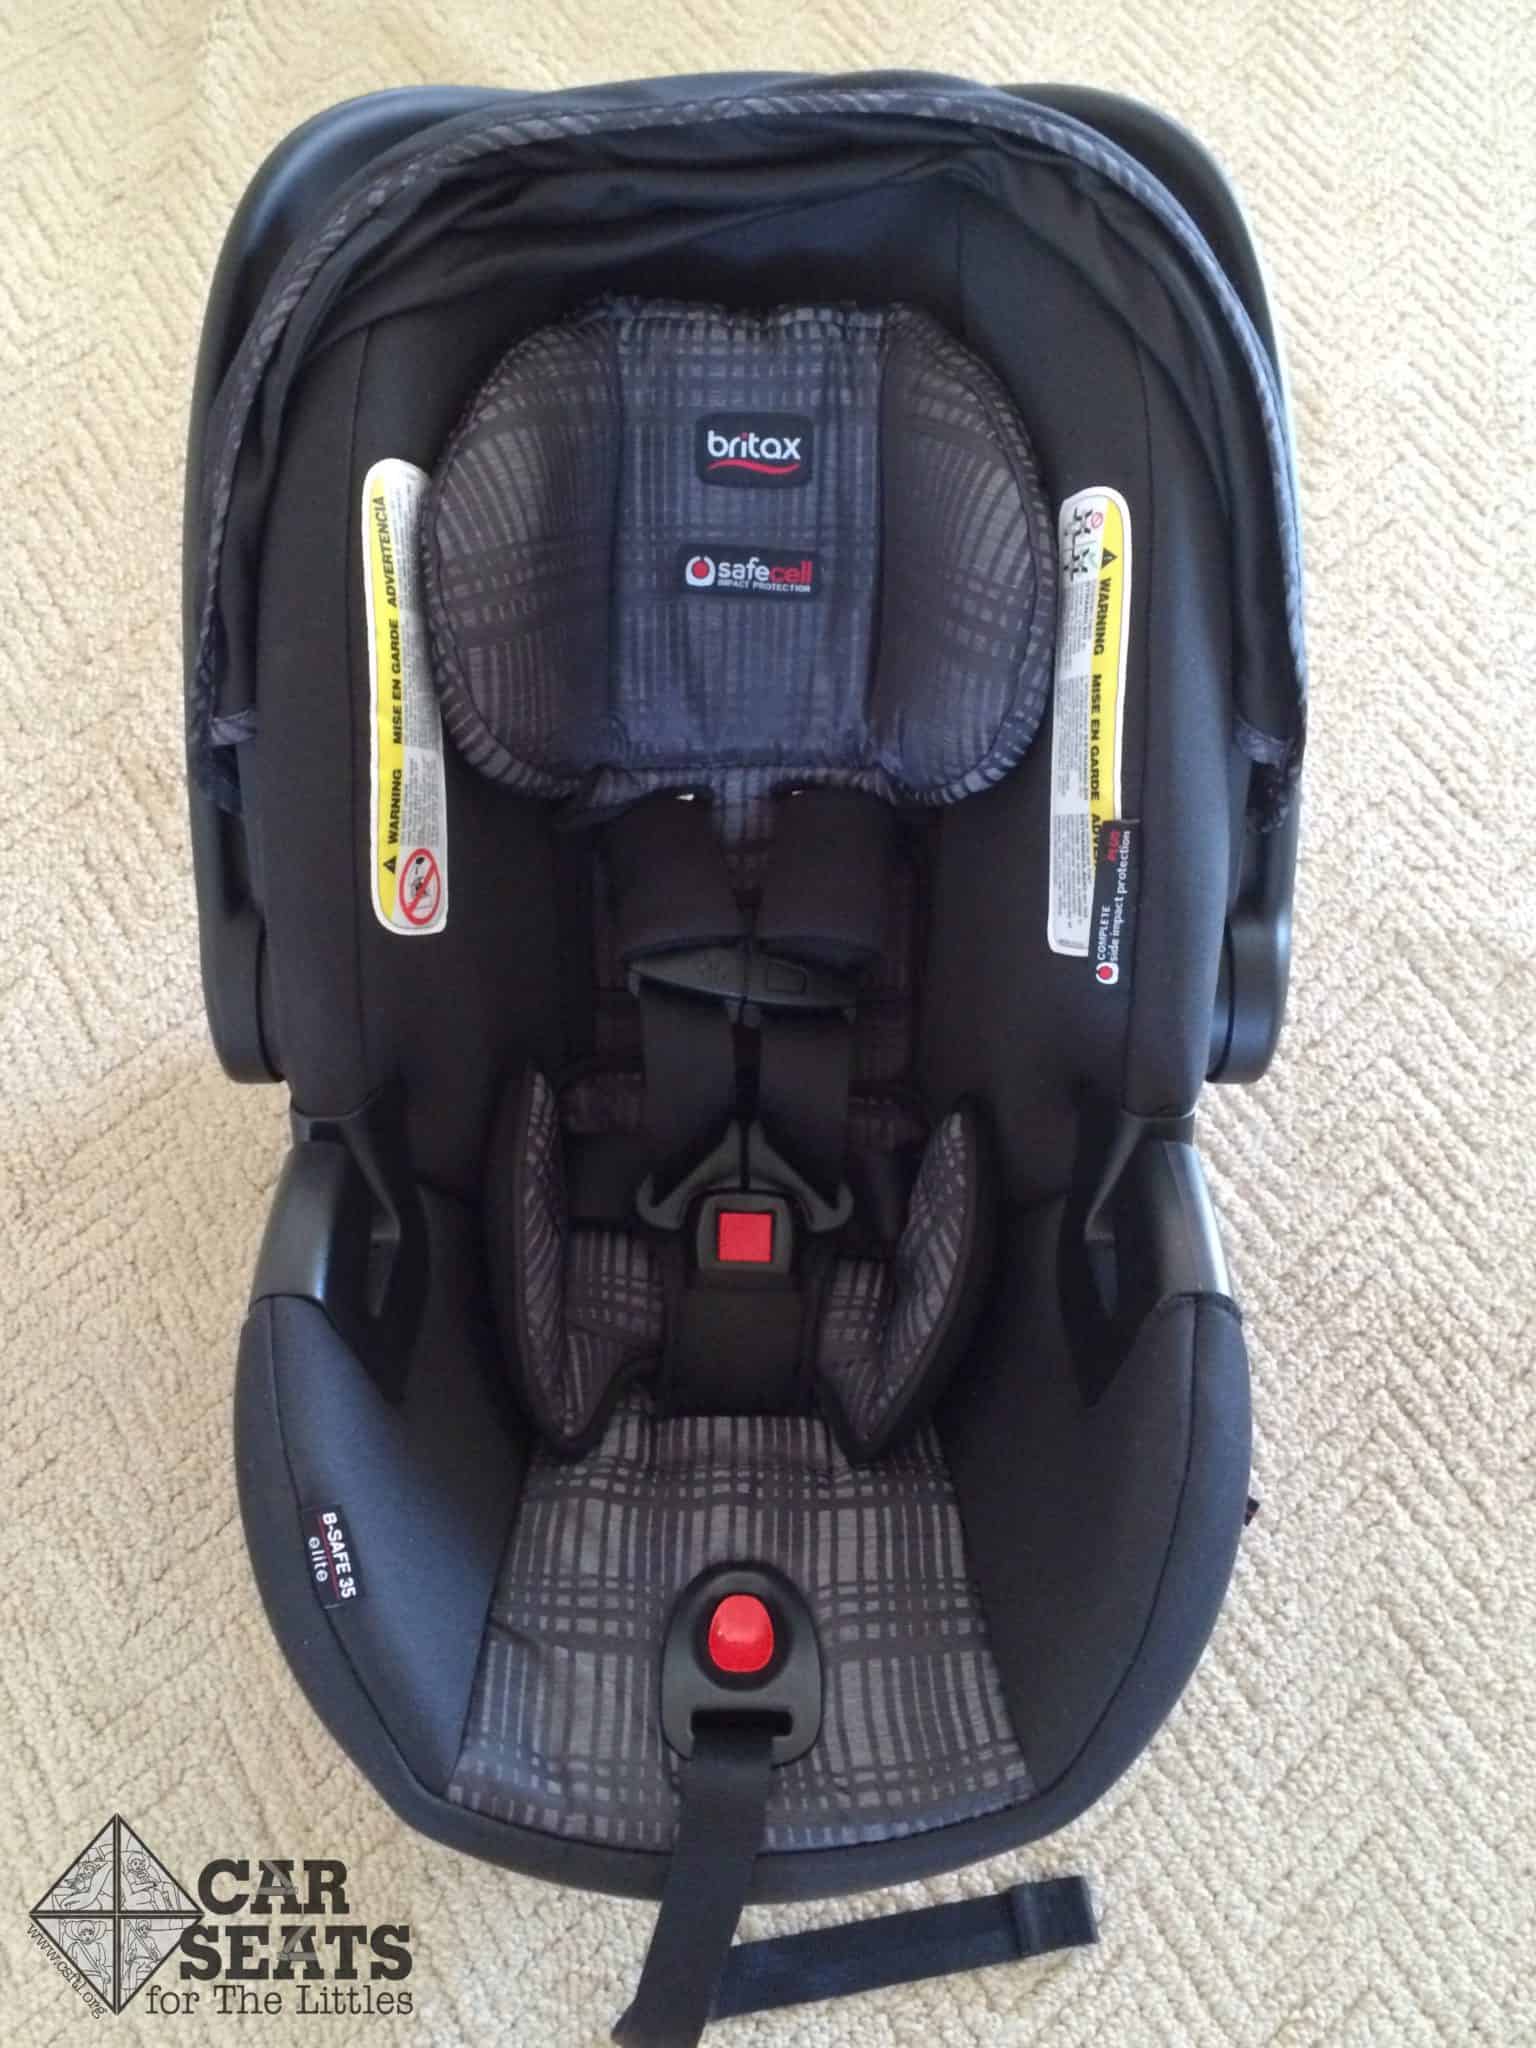 Britax B Safe 35 Elite Review Car Seats For The Littles - How To Wash Britax B Safe 35 Elite Car Seat